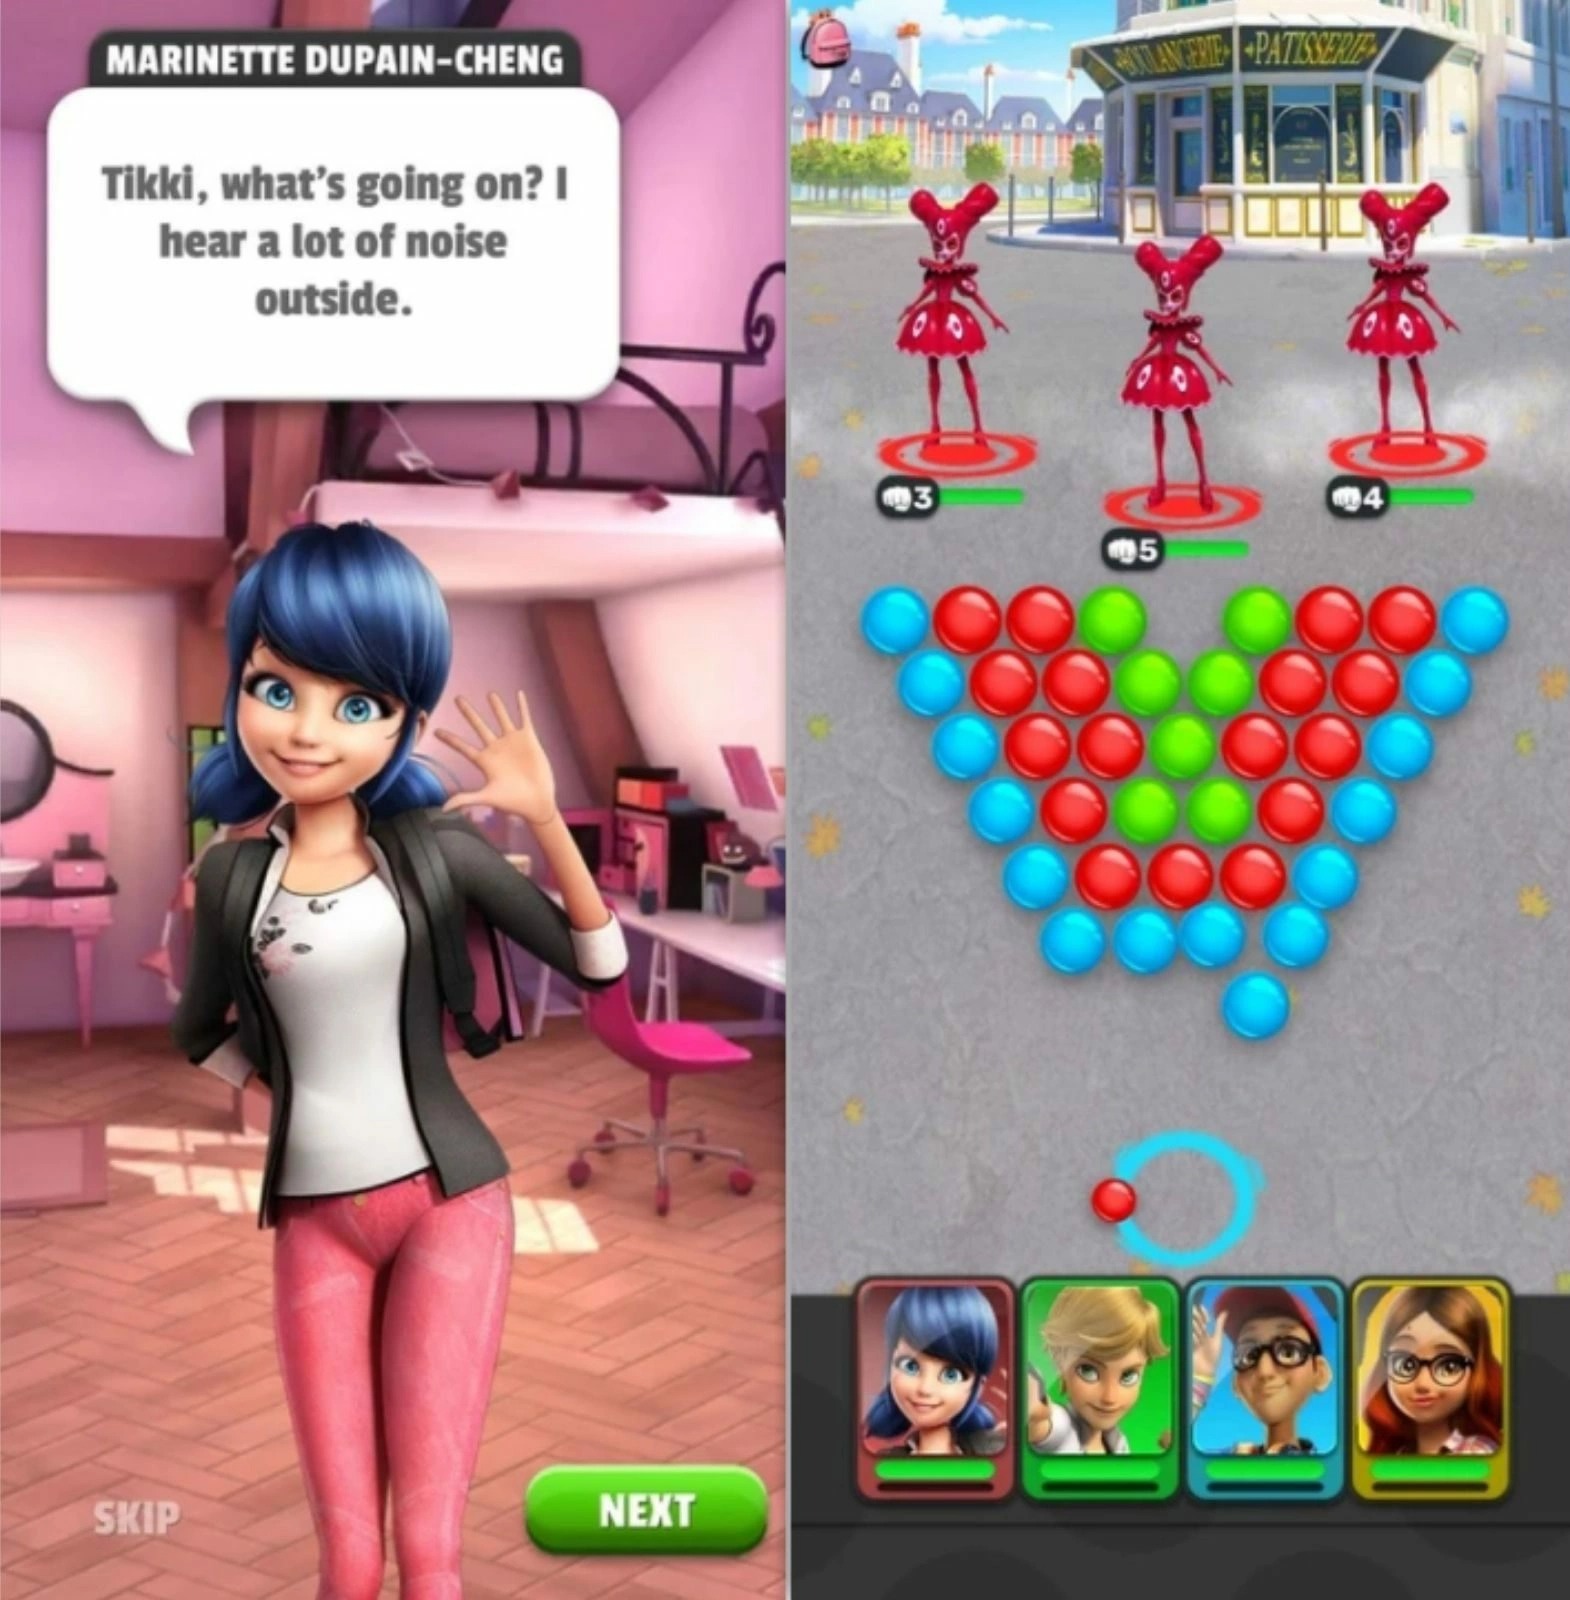 Miraculous: two screenshots, one of Ladybug asking about some noise, and a second one of a bubble shooter